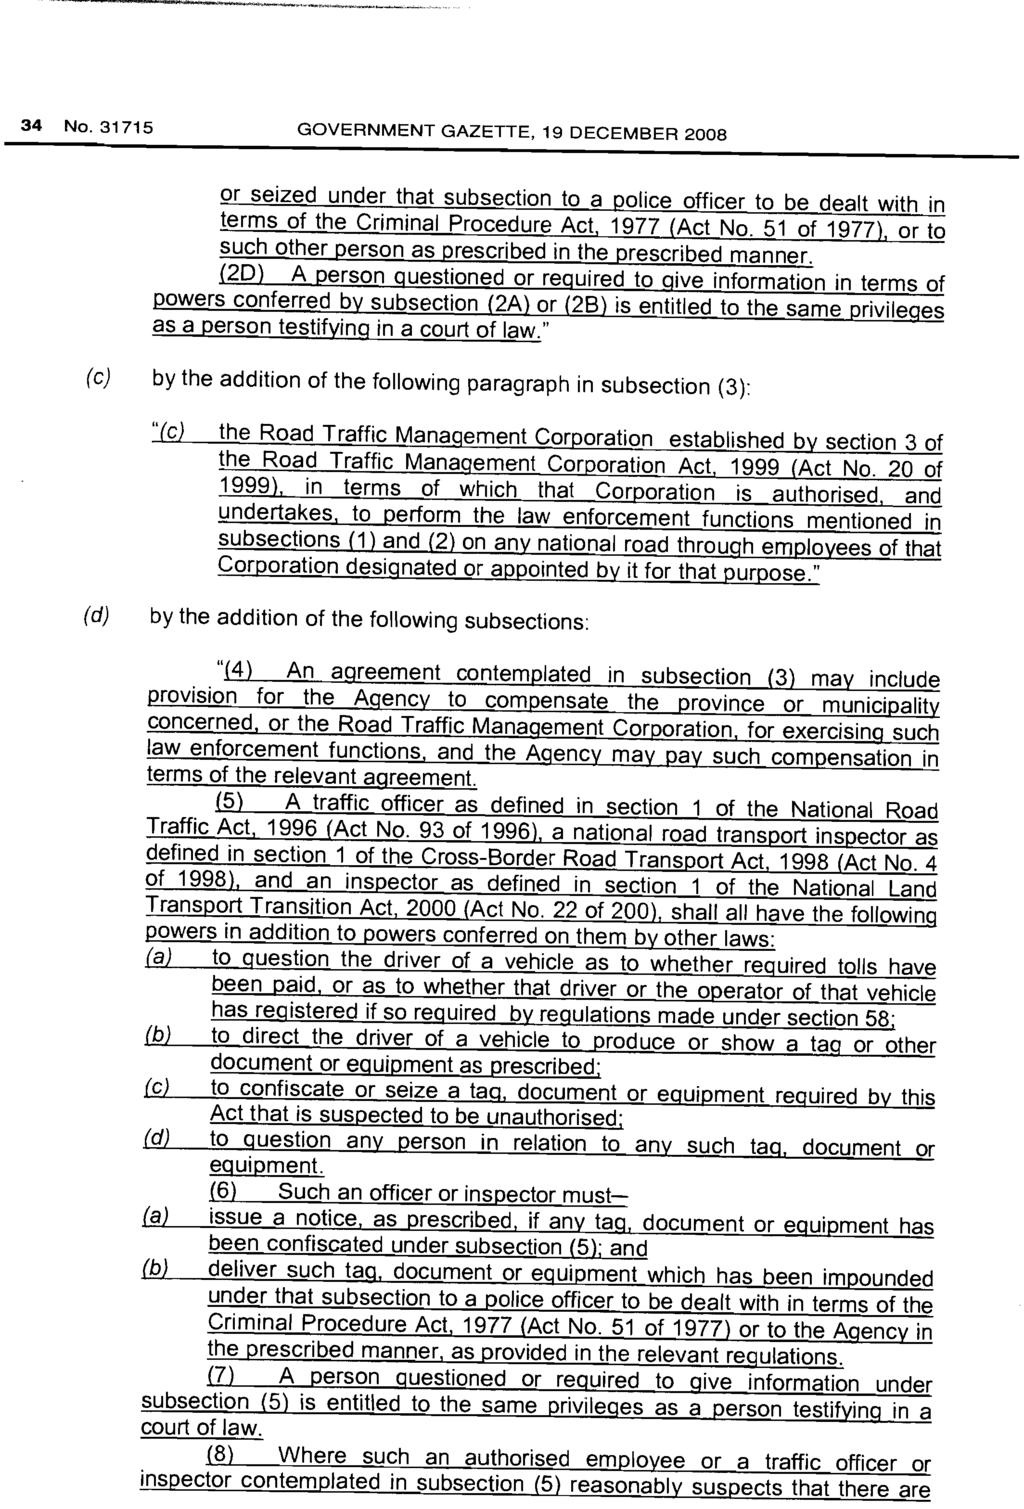 34 No. 31715 GOVERNMENT GAZETTE, 19 DECEMBER 2008 or seized under that subsection to a police officer to be dealt with in terms of the Criminal Procedure Act, 1977 (Act No. 51 of 1977).